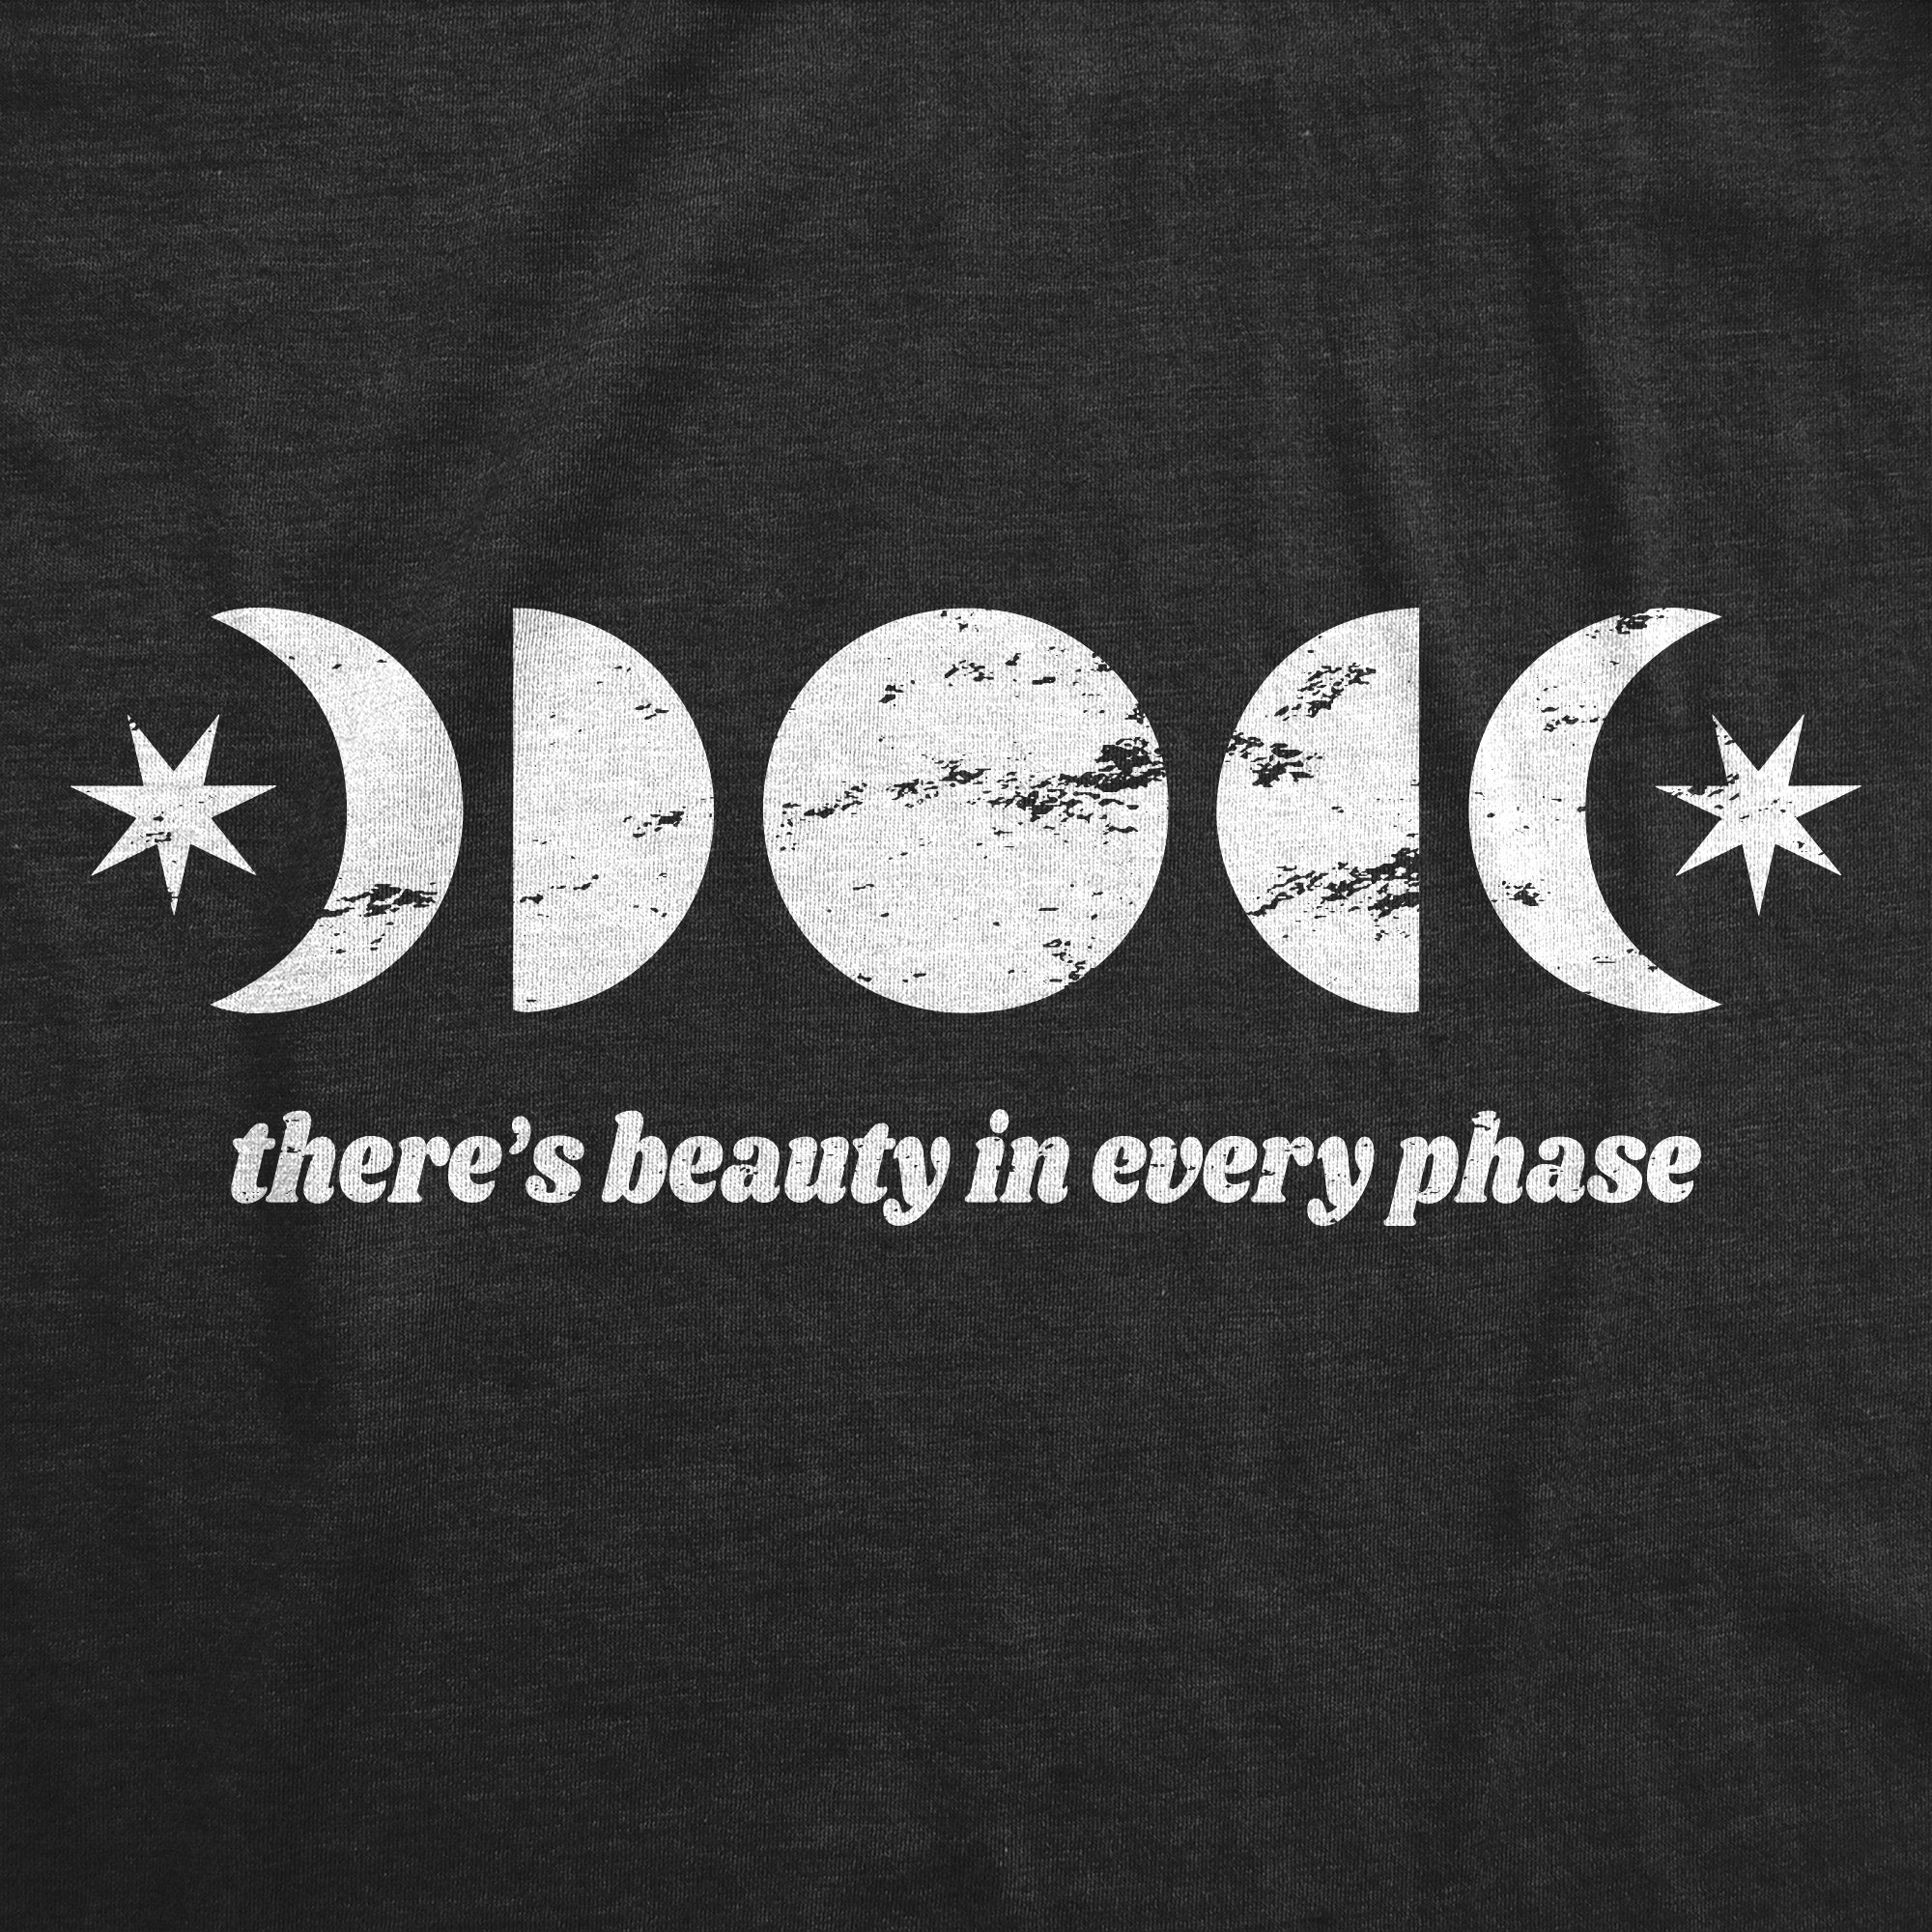 Funny Heather Black - PHASE Theres Beauty In Every Phase Womens T Shirt Nerdy space Tee